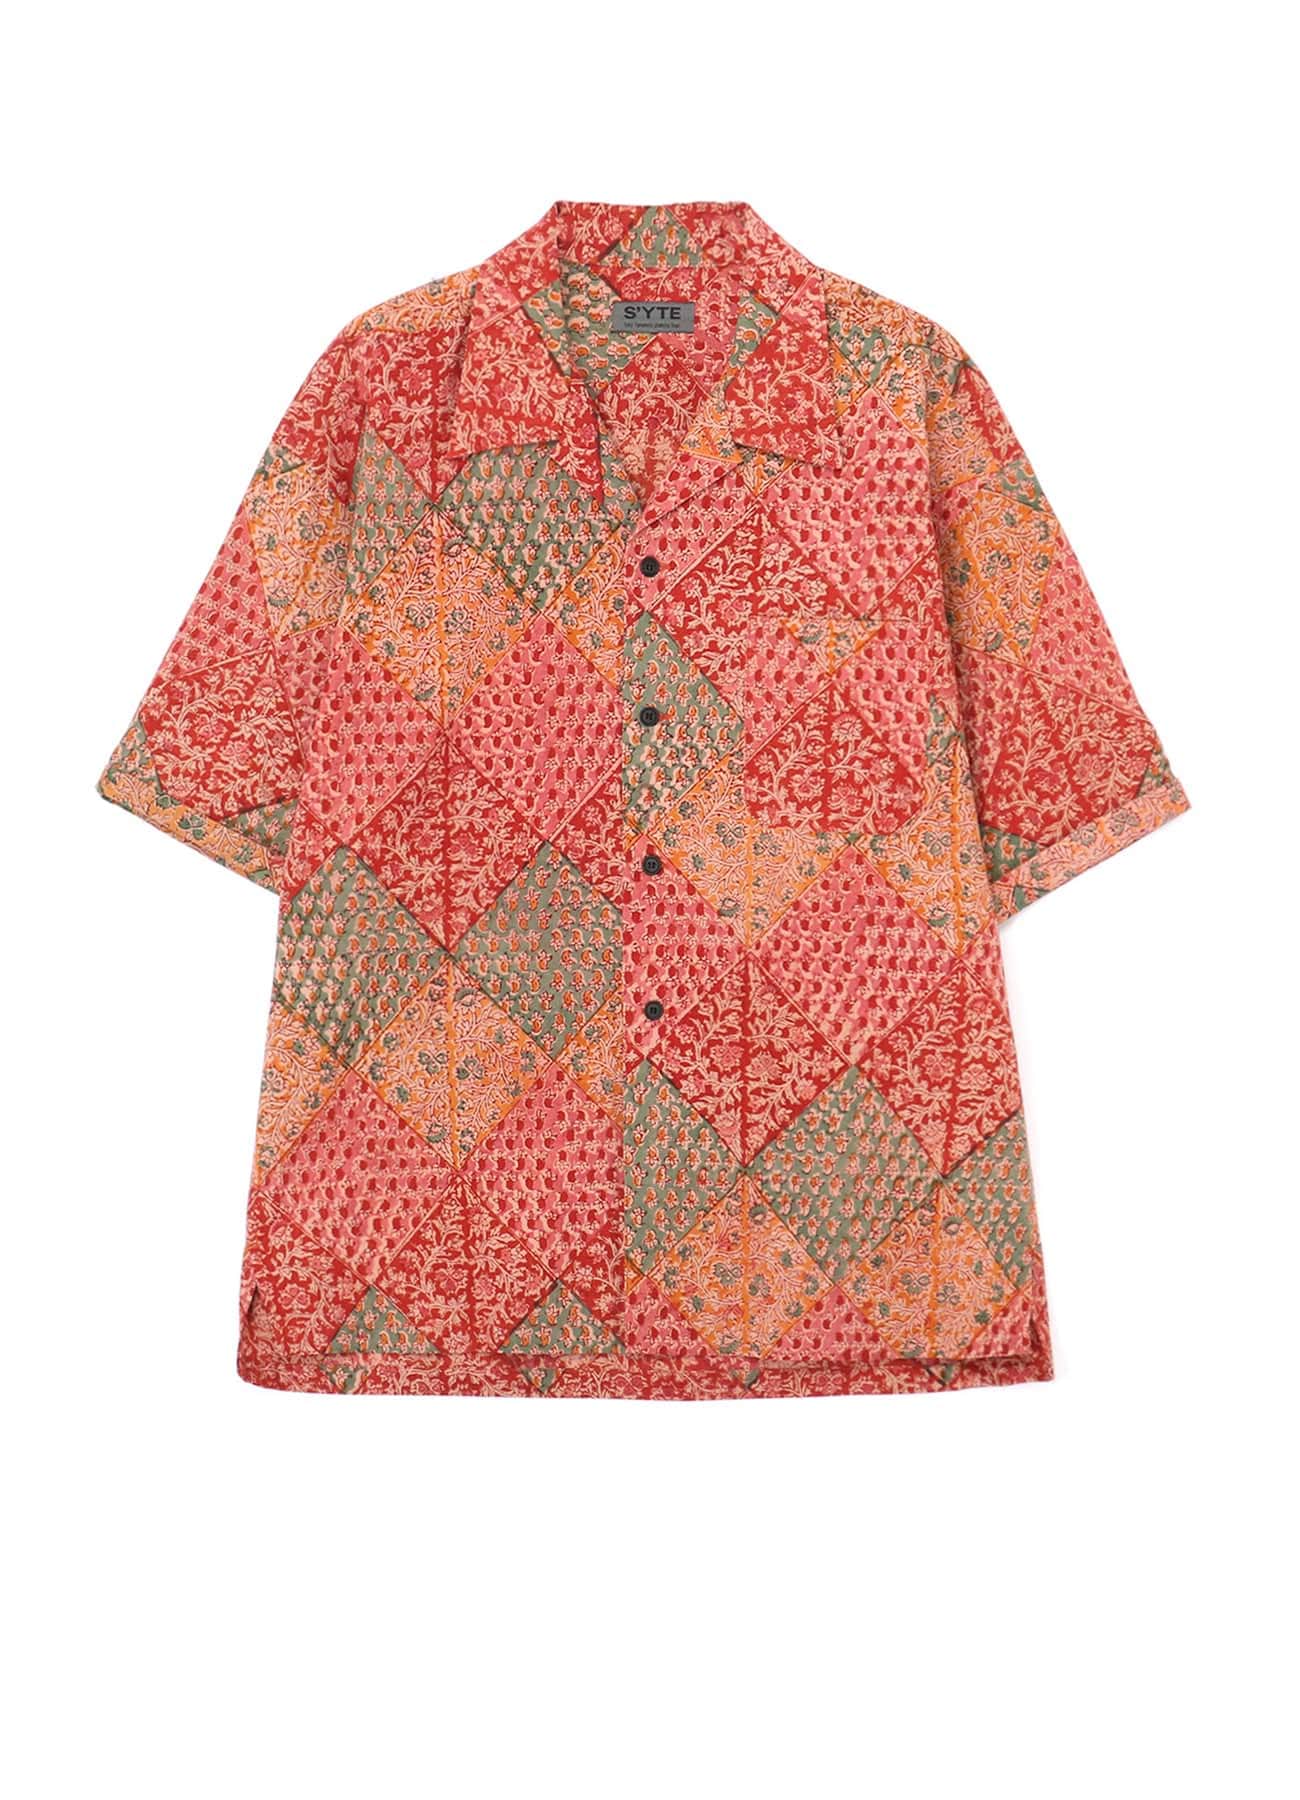 INDIAN BLOCK PRINTED BOTANICAL PATTERN SHIRT WITH ROLL-UP HALF SLEEVES